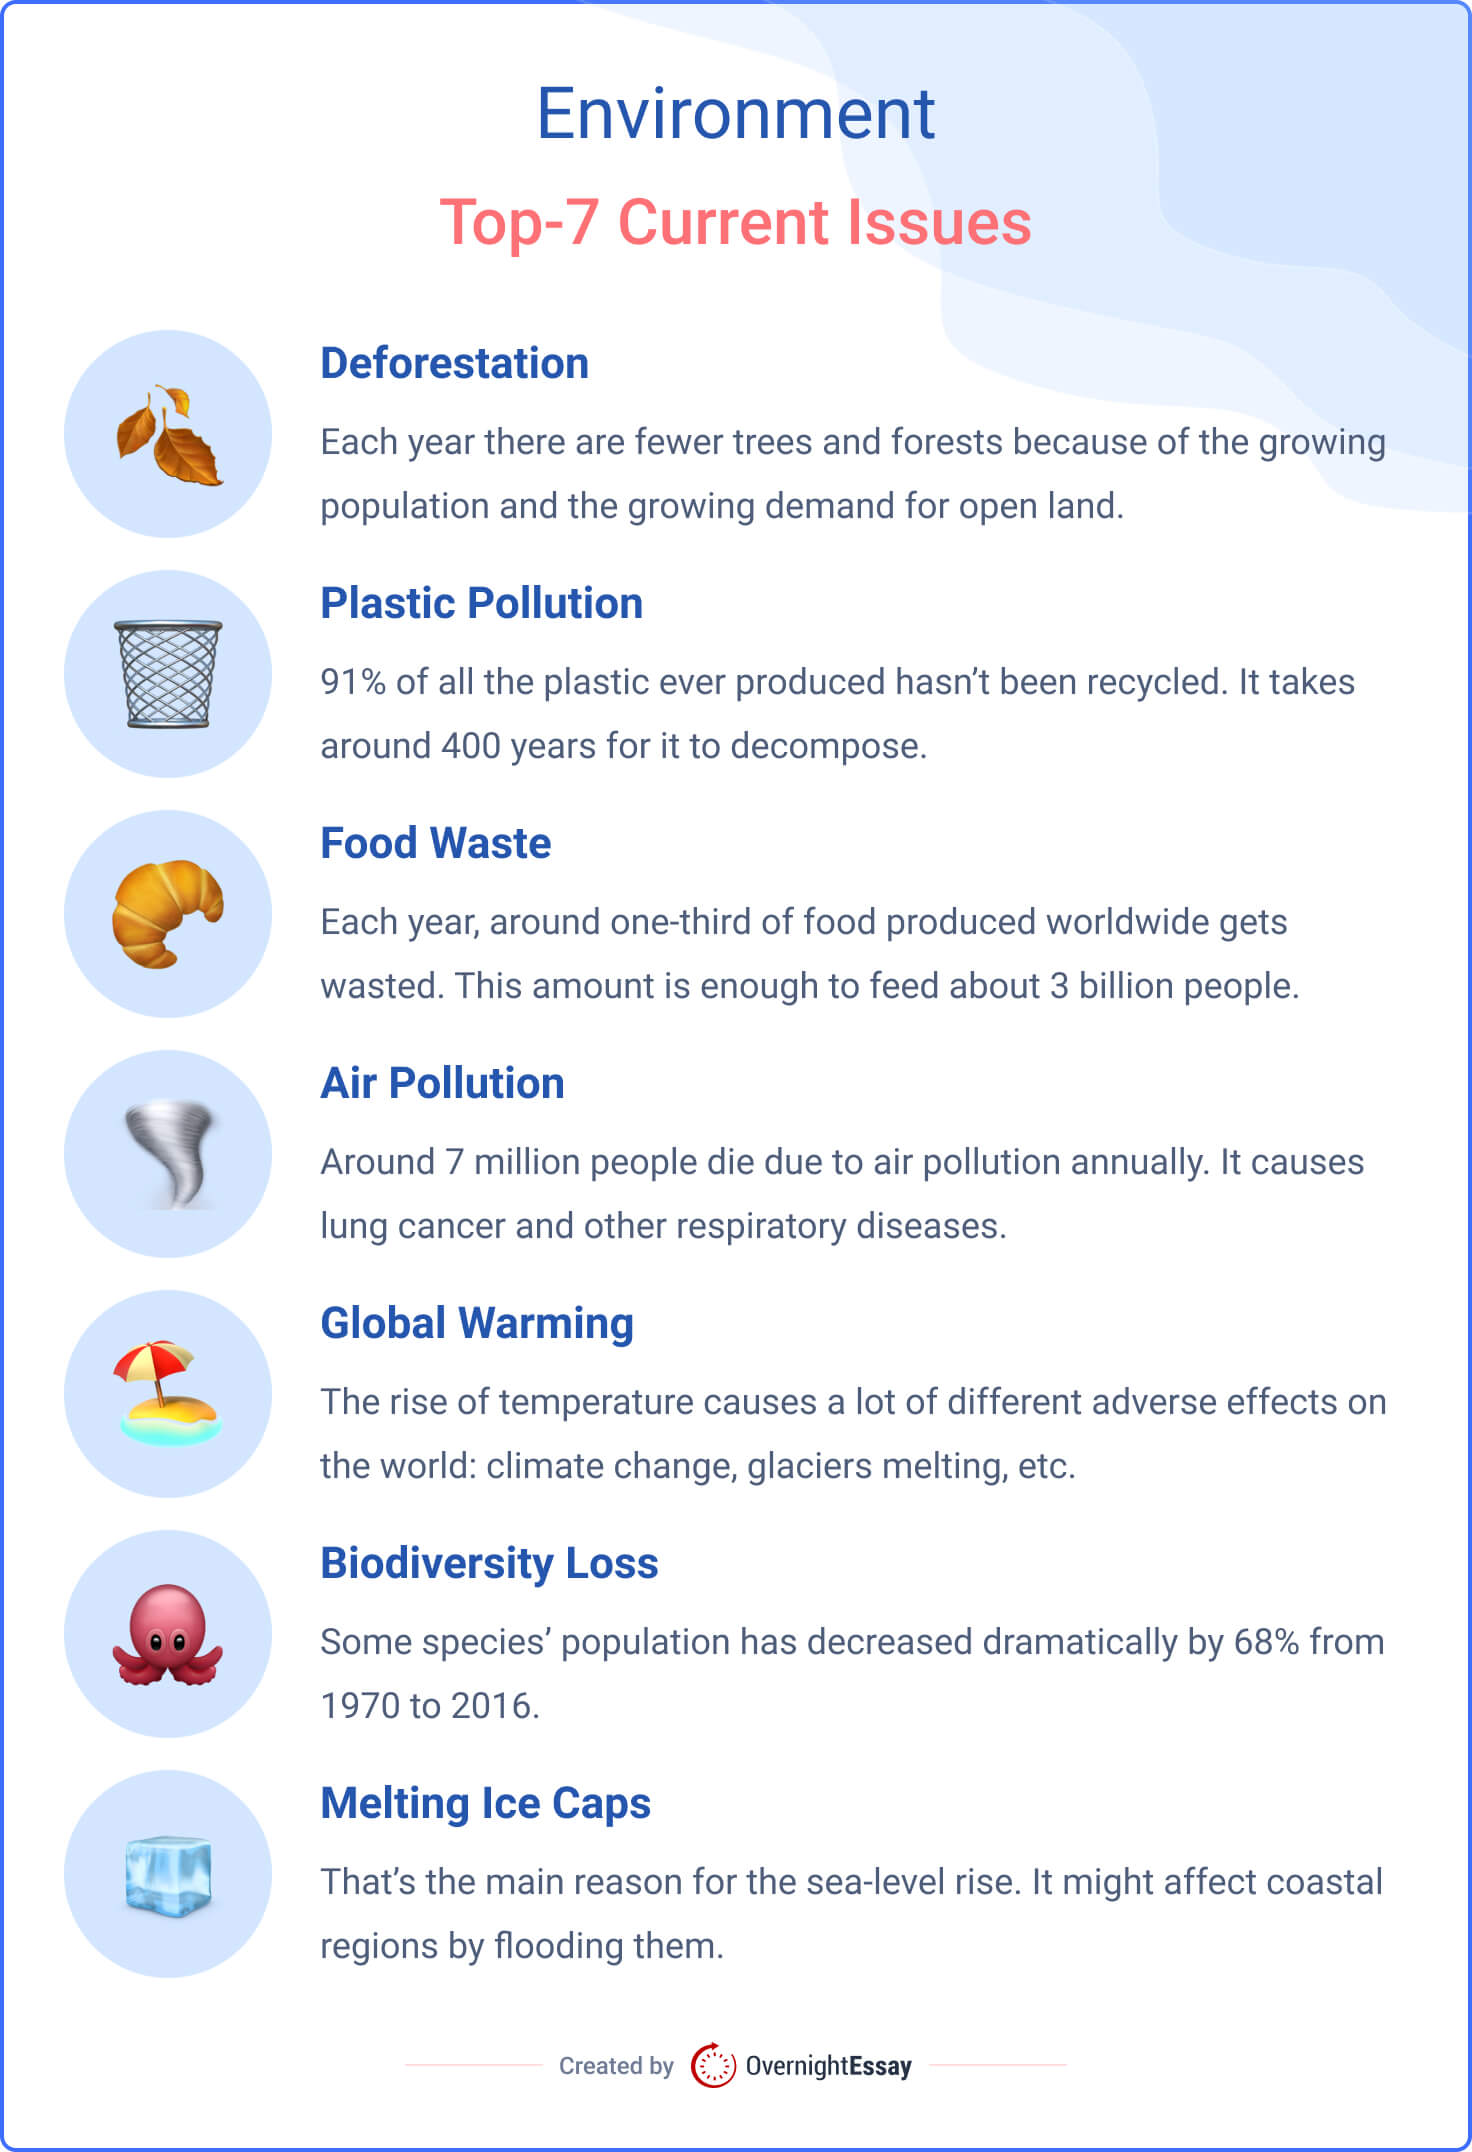 The picture contains a list of some relevant environmental issues of the modern world.